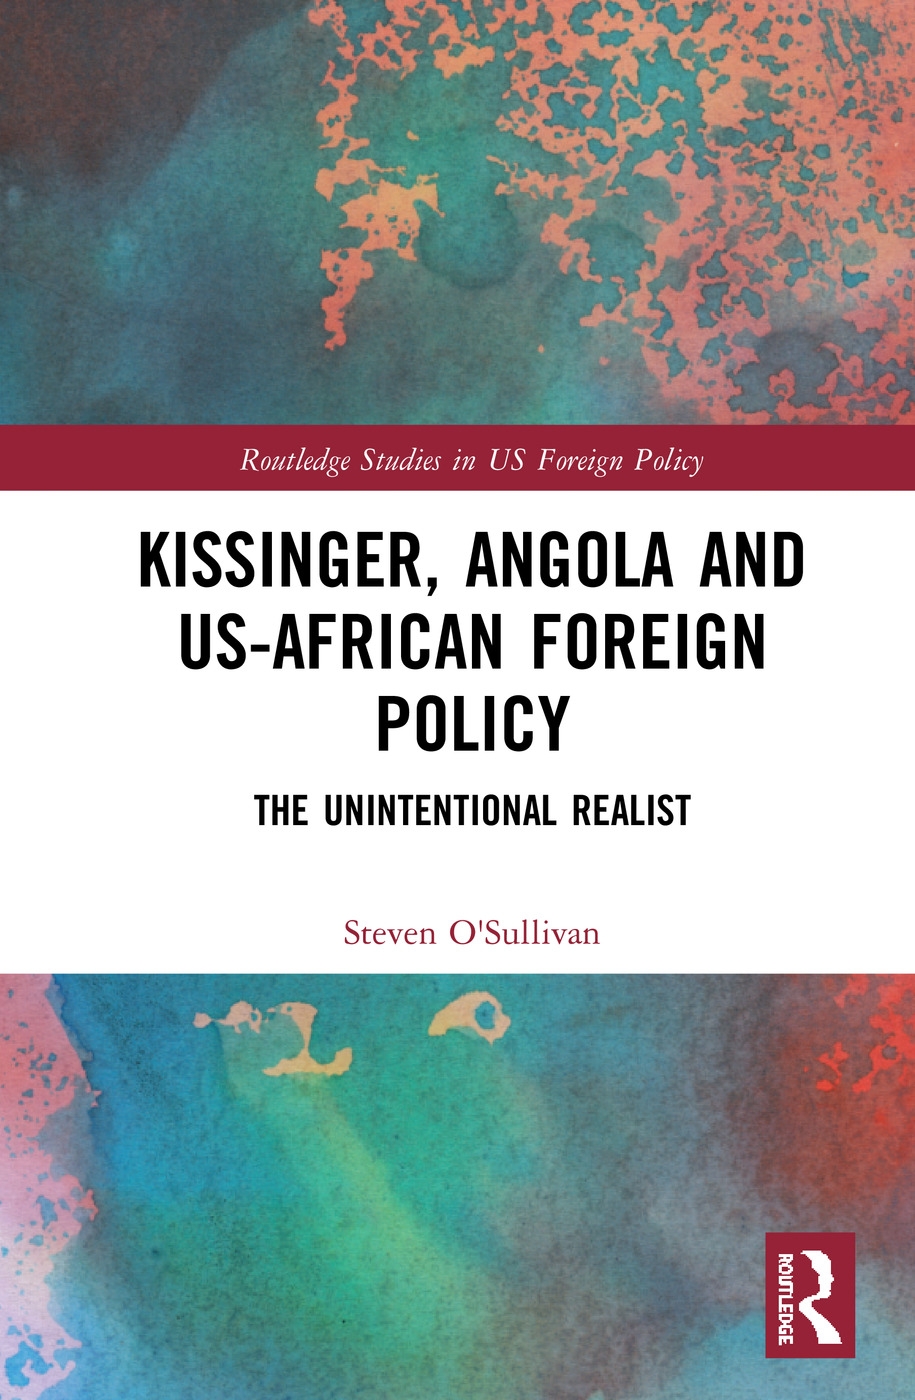 Kissinger, Angola and Us-African Foreign Policy: The Unintentional Realist